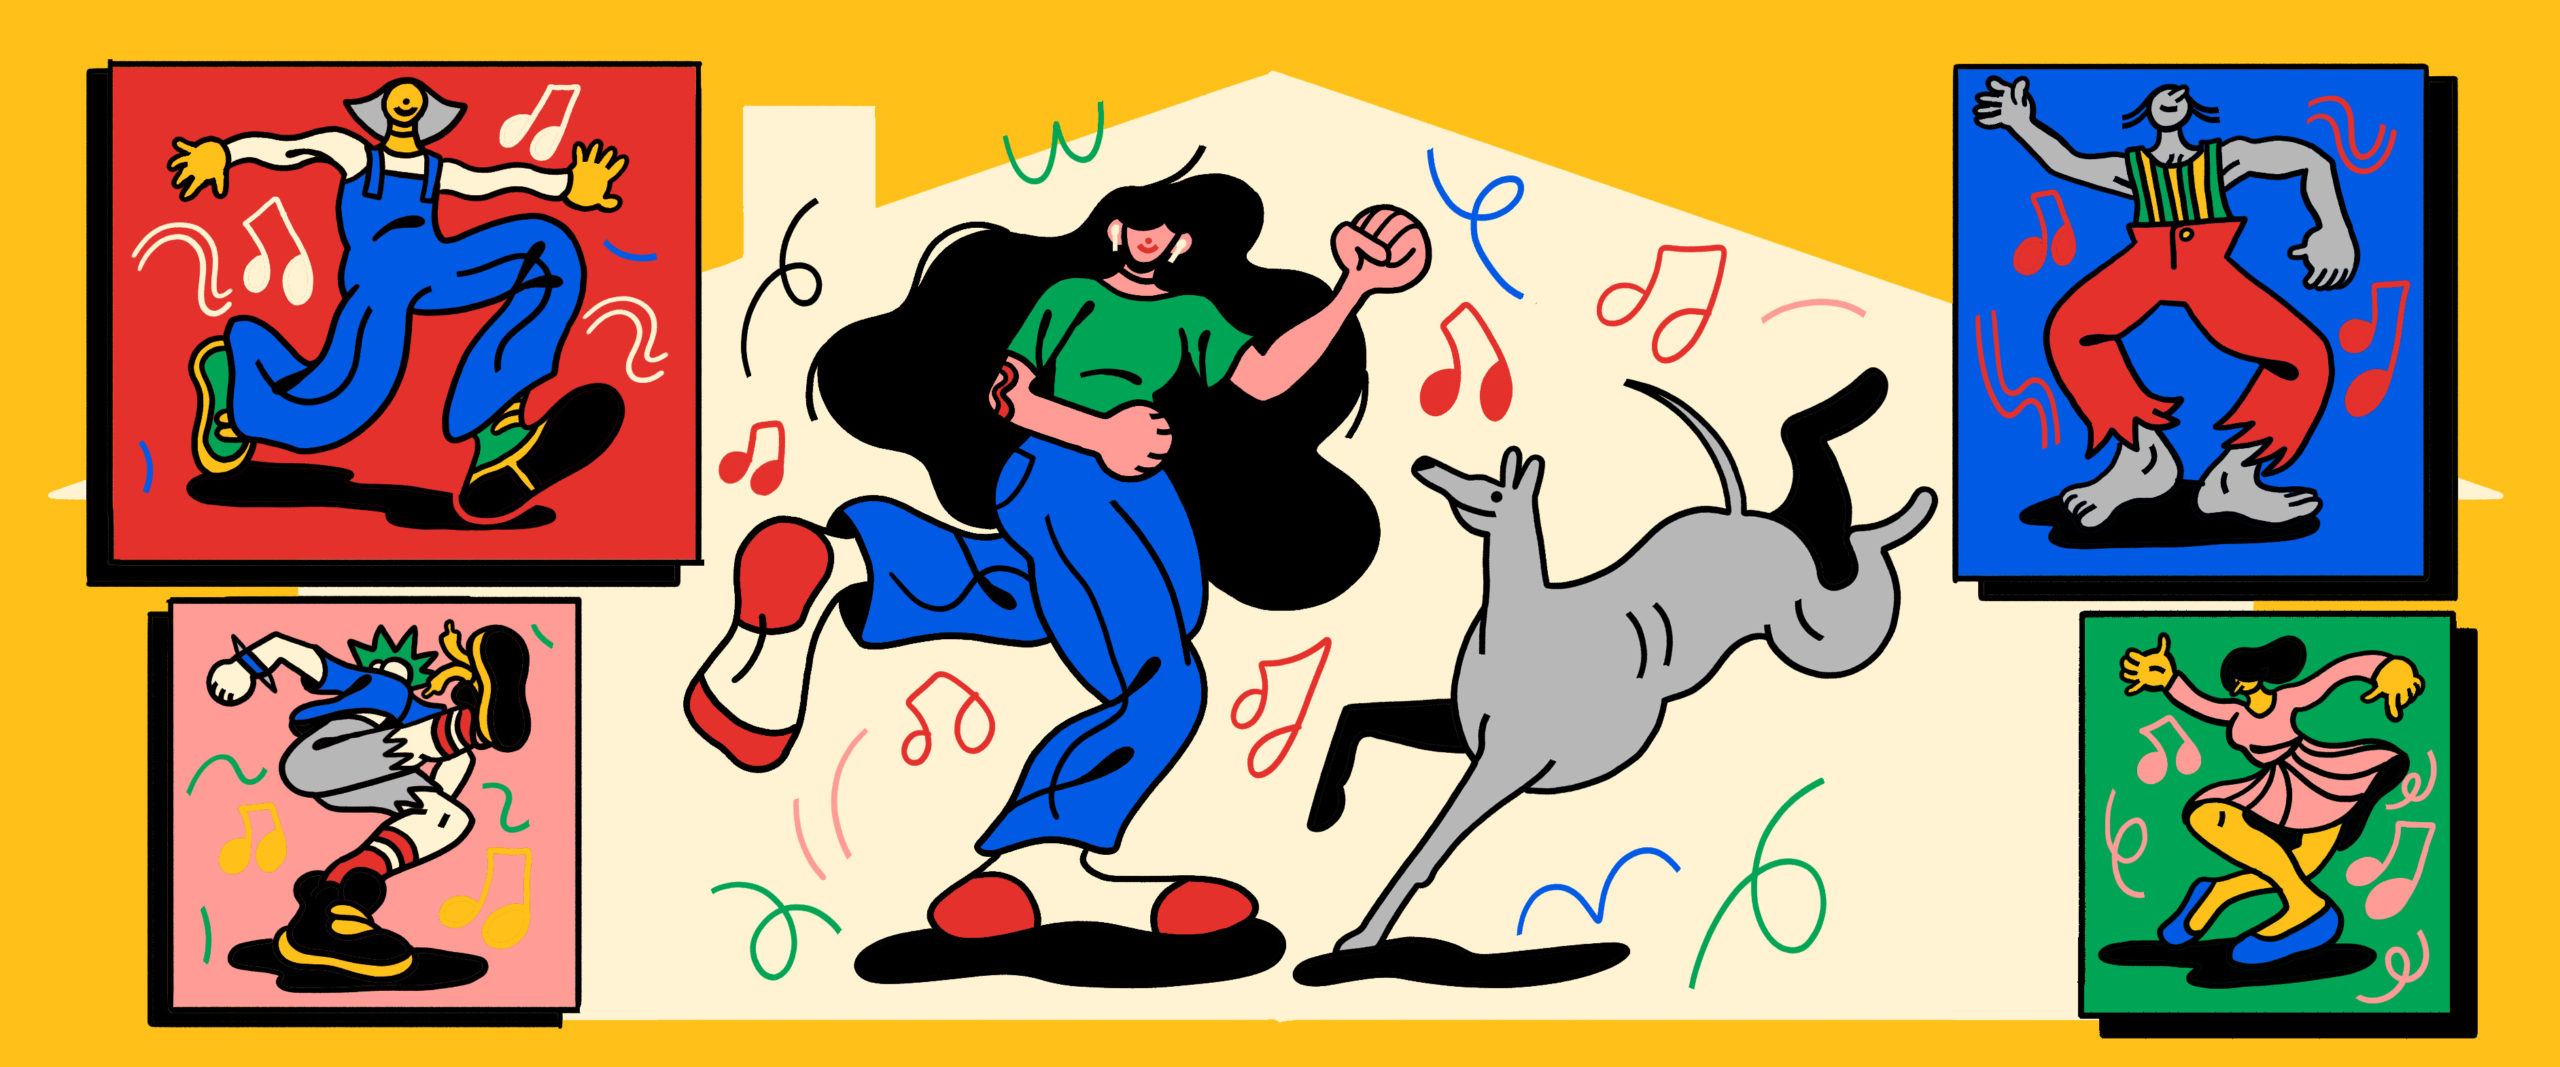 Illustration of people and a dog dancing in separate corners.